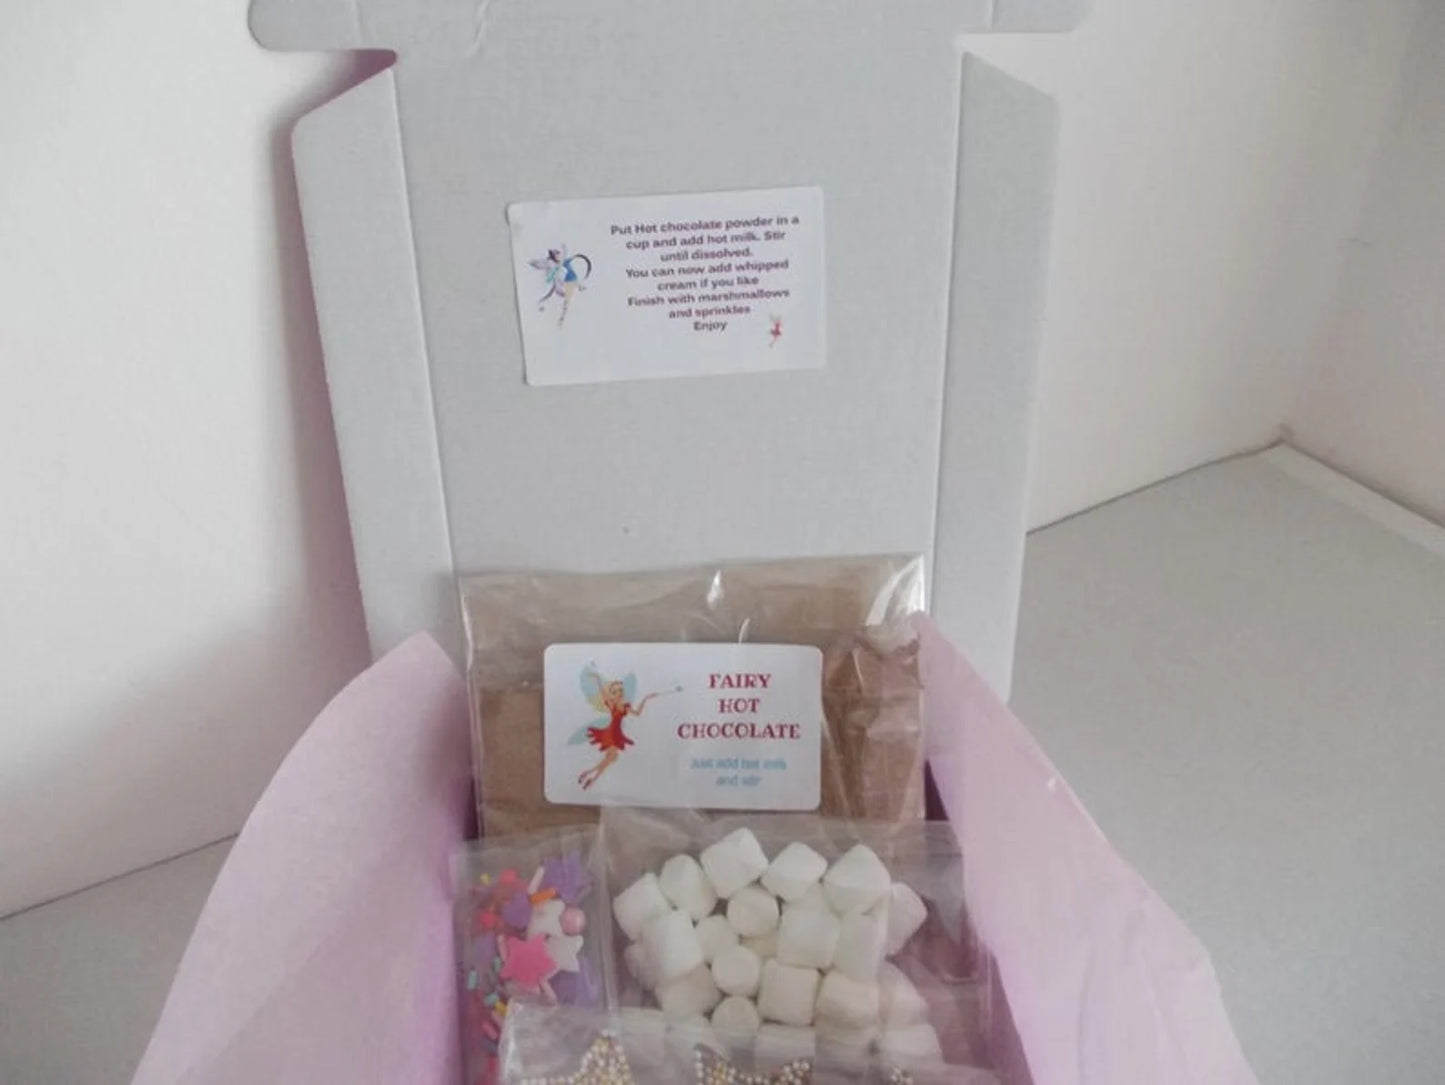 Fairy Hot Chocolate letterbox gift, A hug in a mug for someone you love,grate Card alternative,Kids chocolate gift